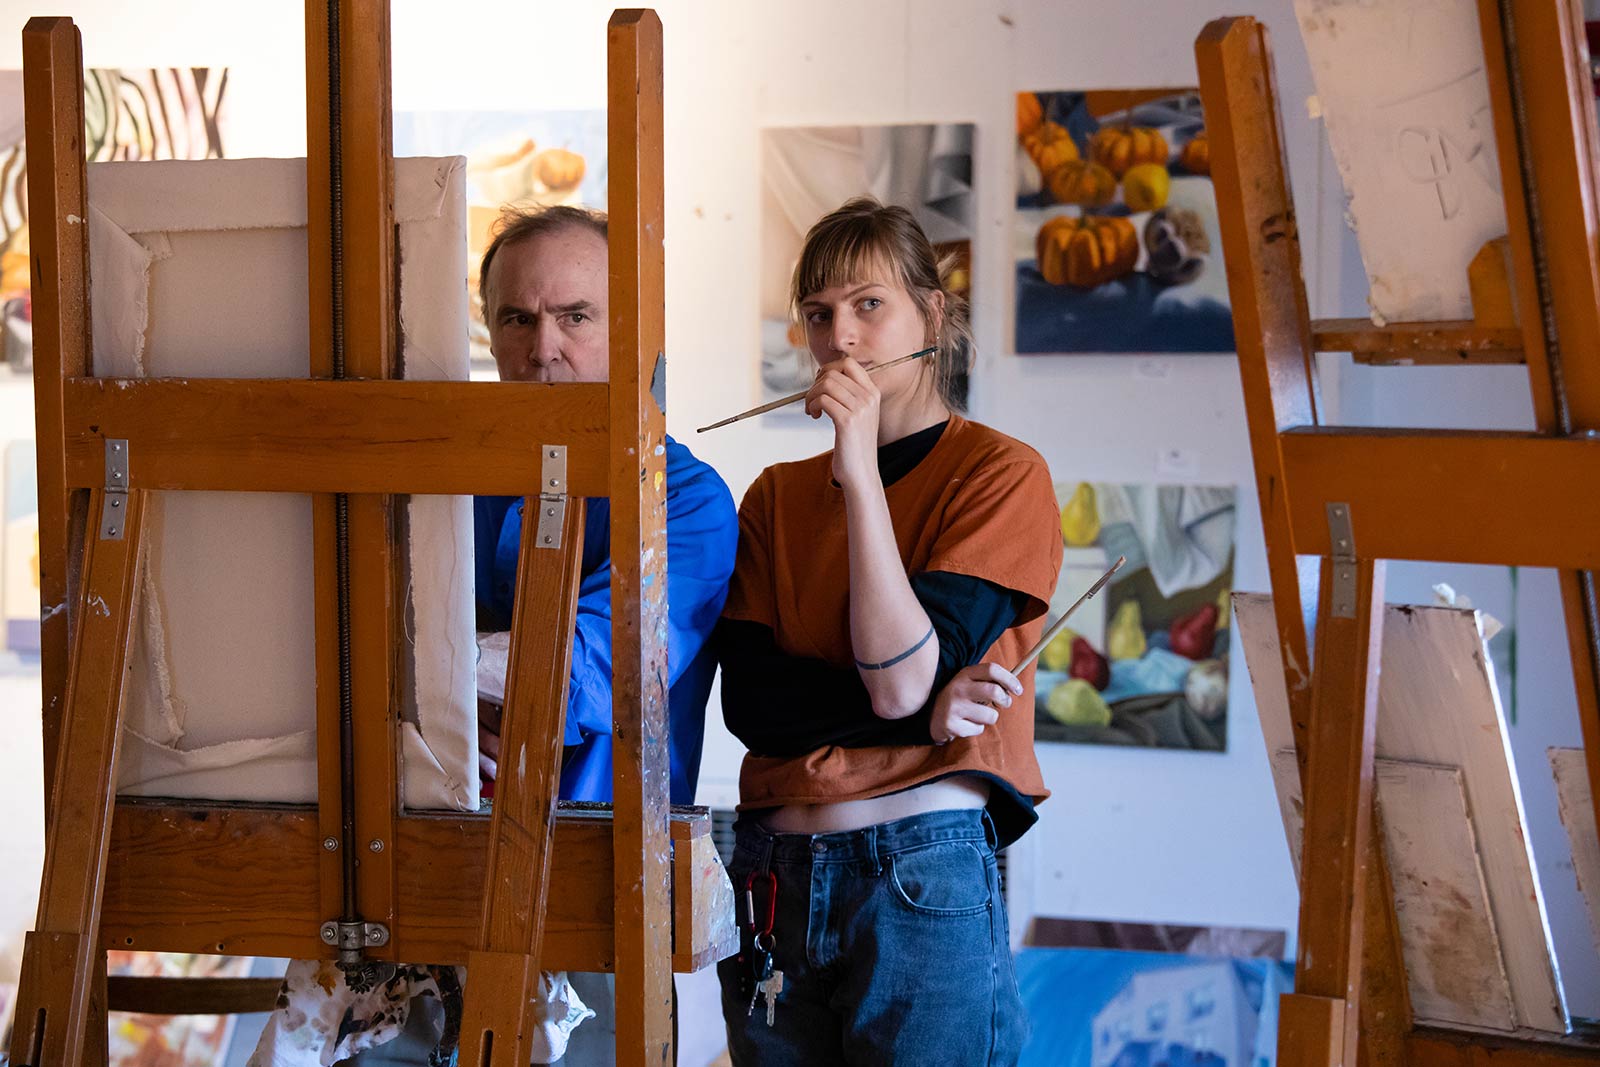 Professor Robert Sweeney and a student examine a student painting